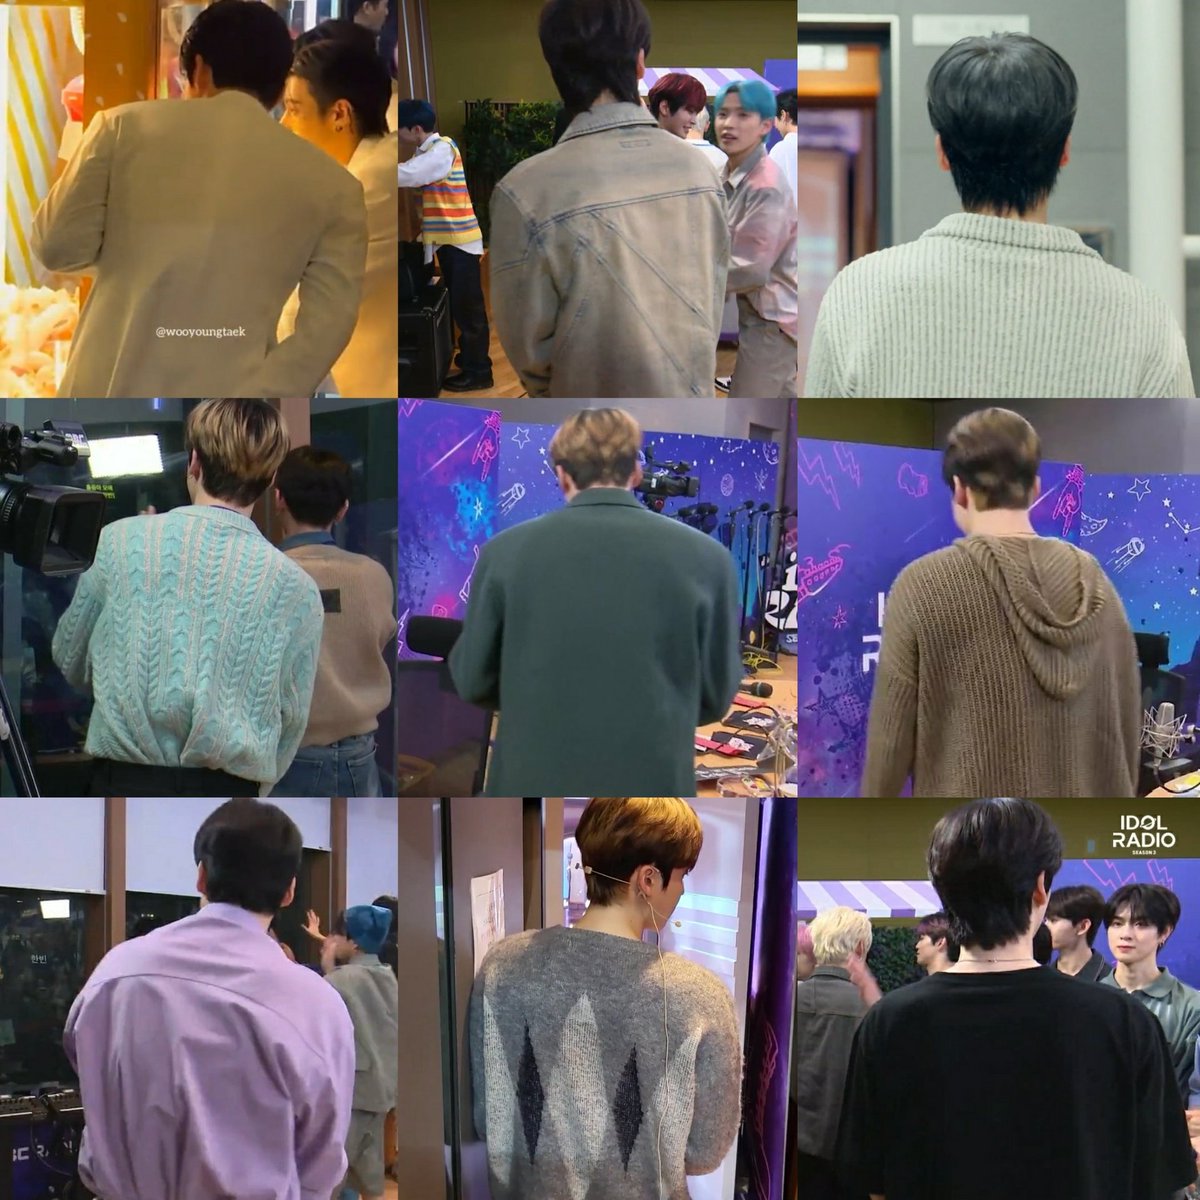 yunho's back.. his broad shoulders😭